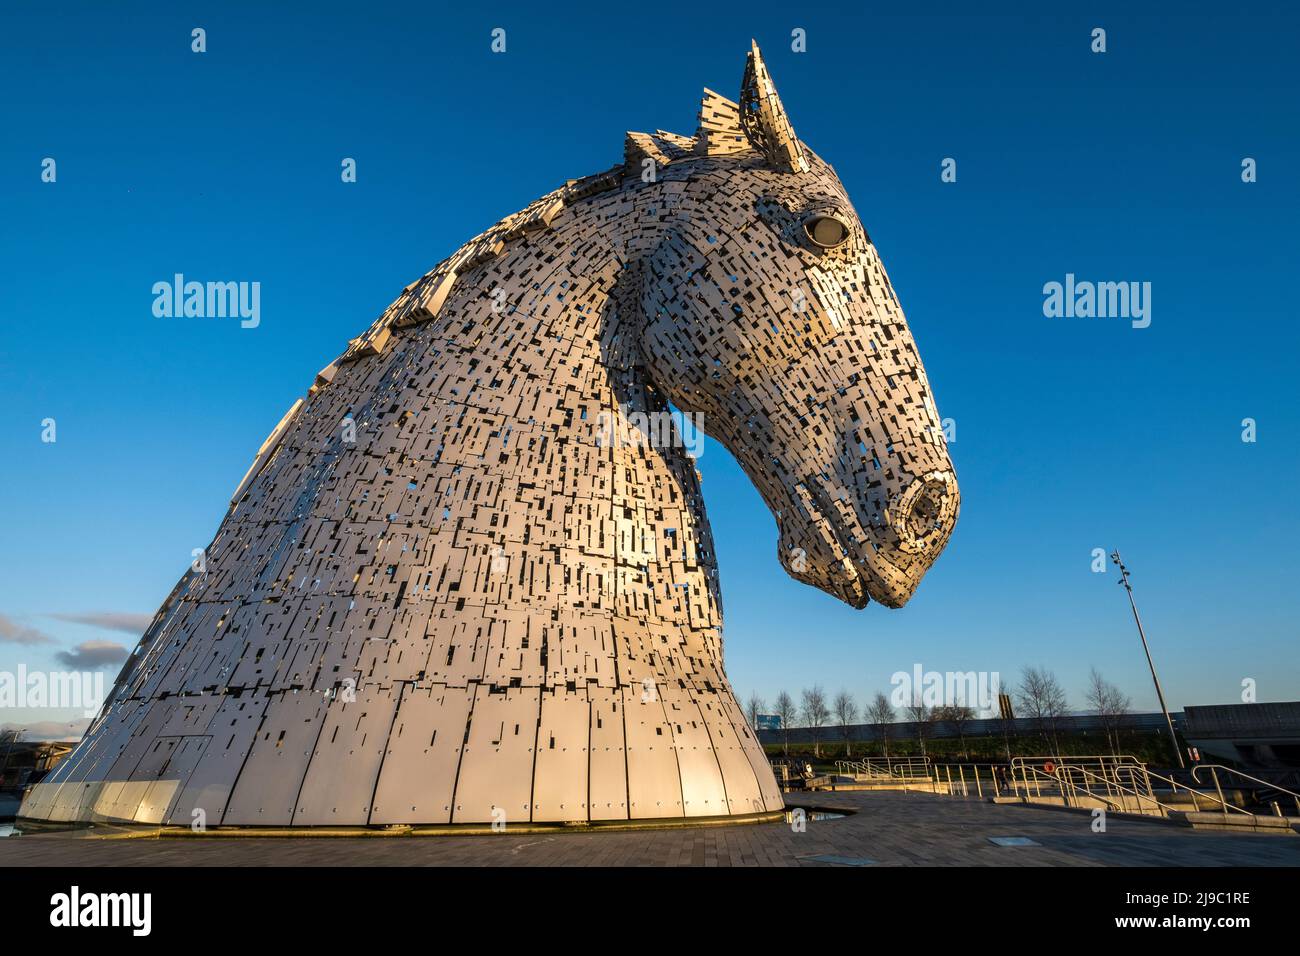 Profile picture of one of the Kelpies sculptures in Falkirk in Scotland. Stock Photo